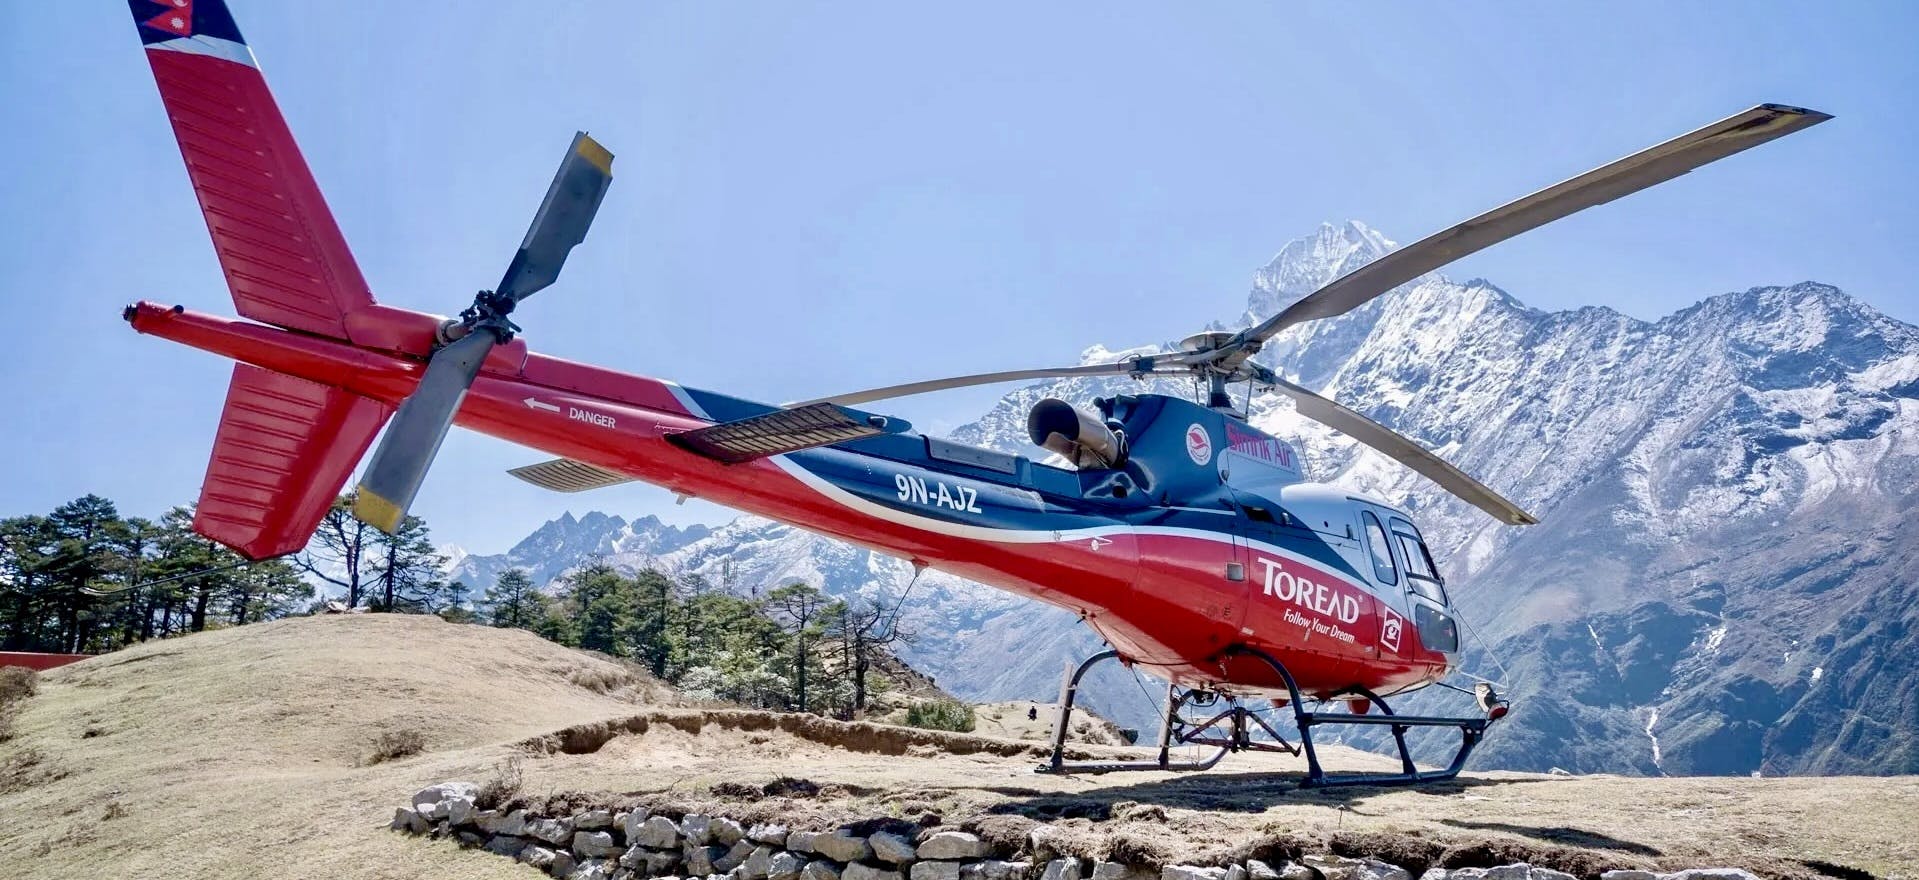 Sharing Vs Private Everest Base Camp Helicopter Tour